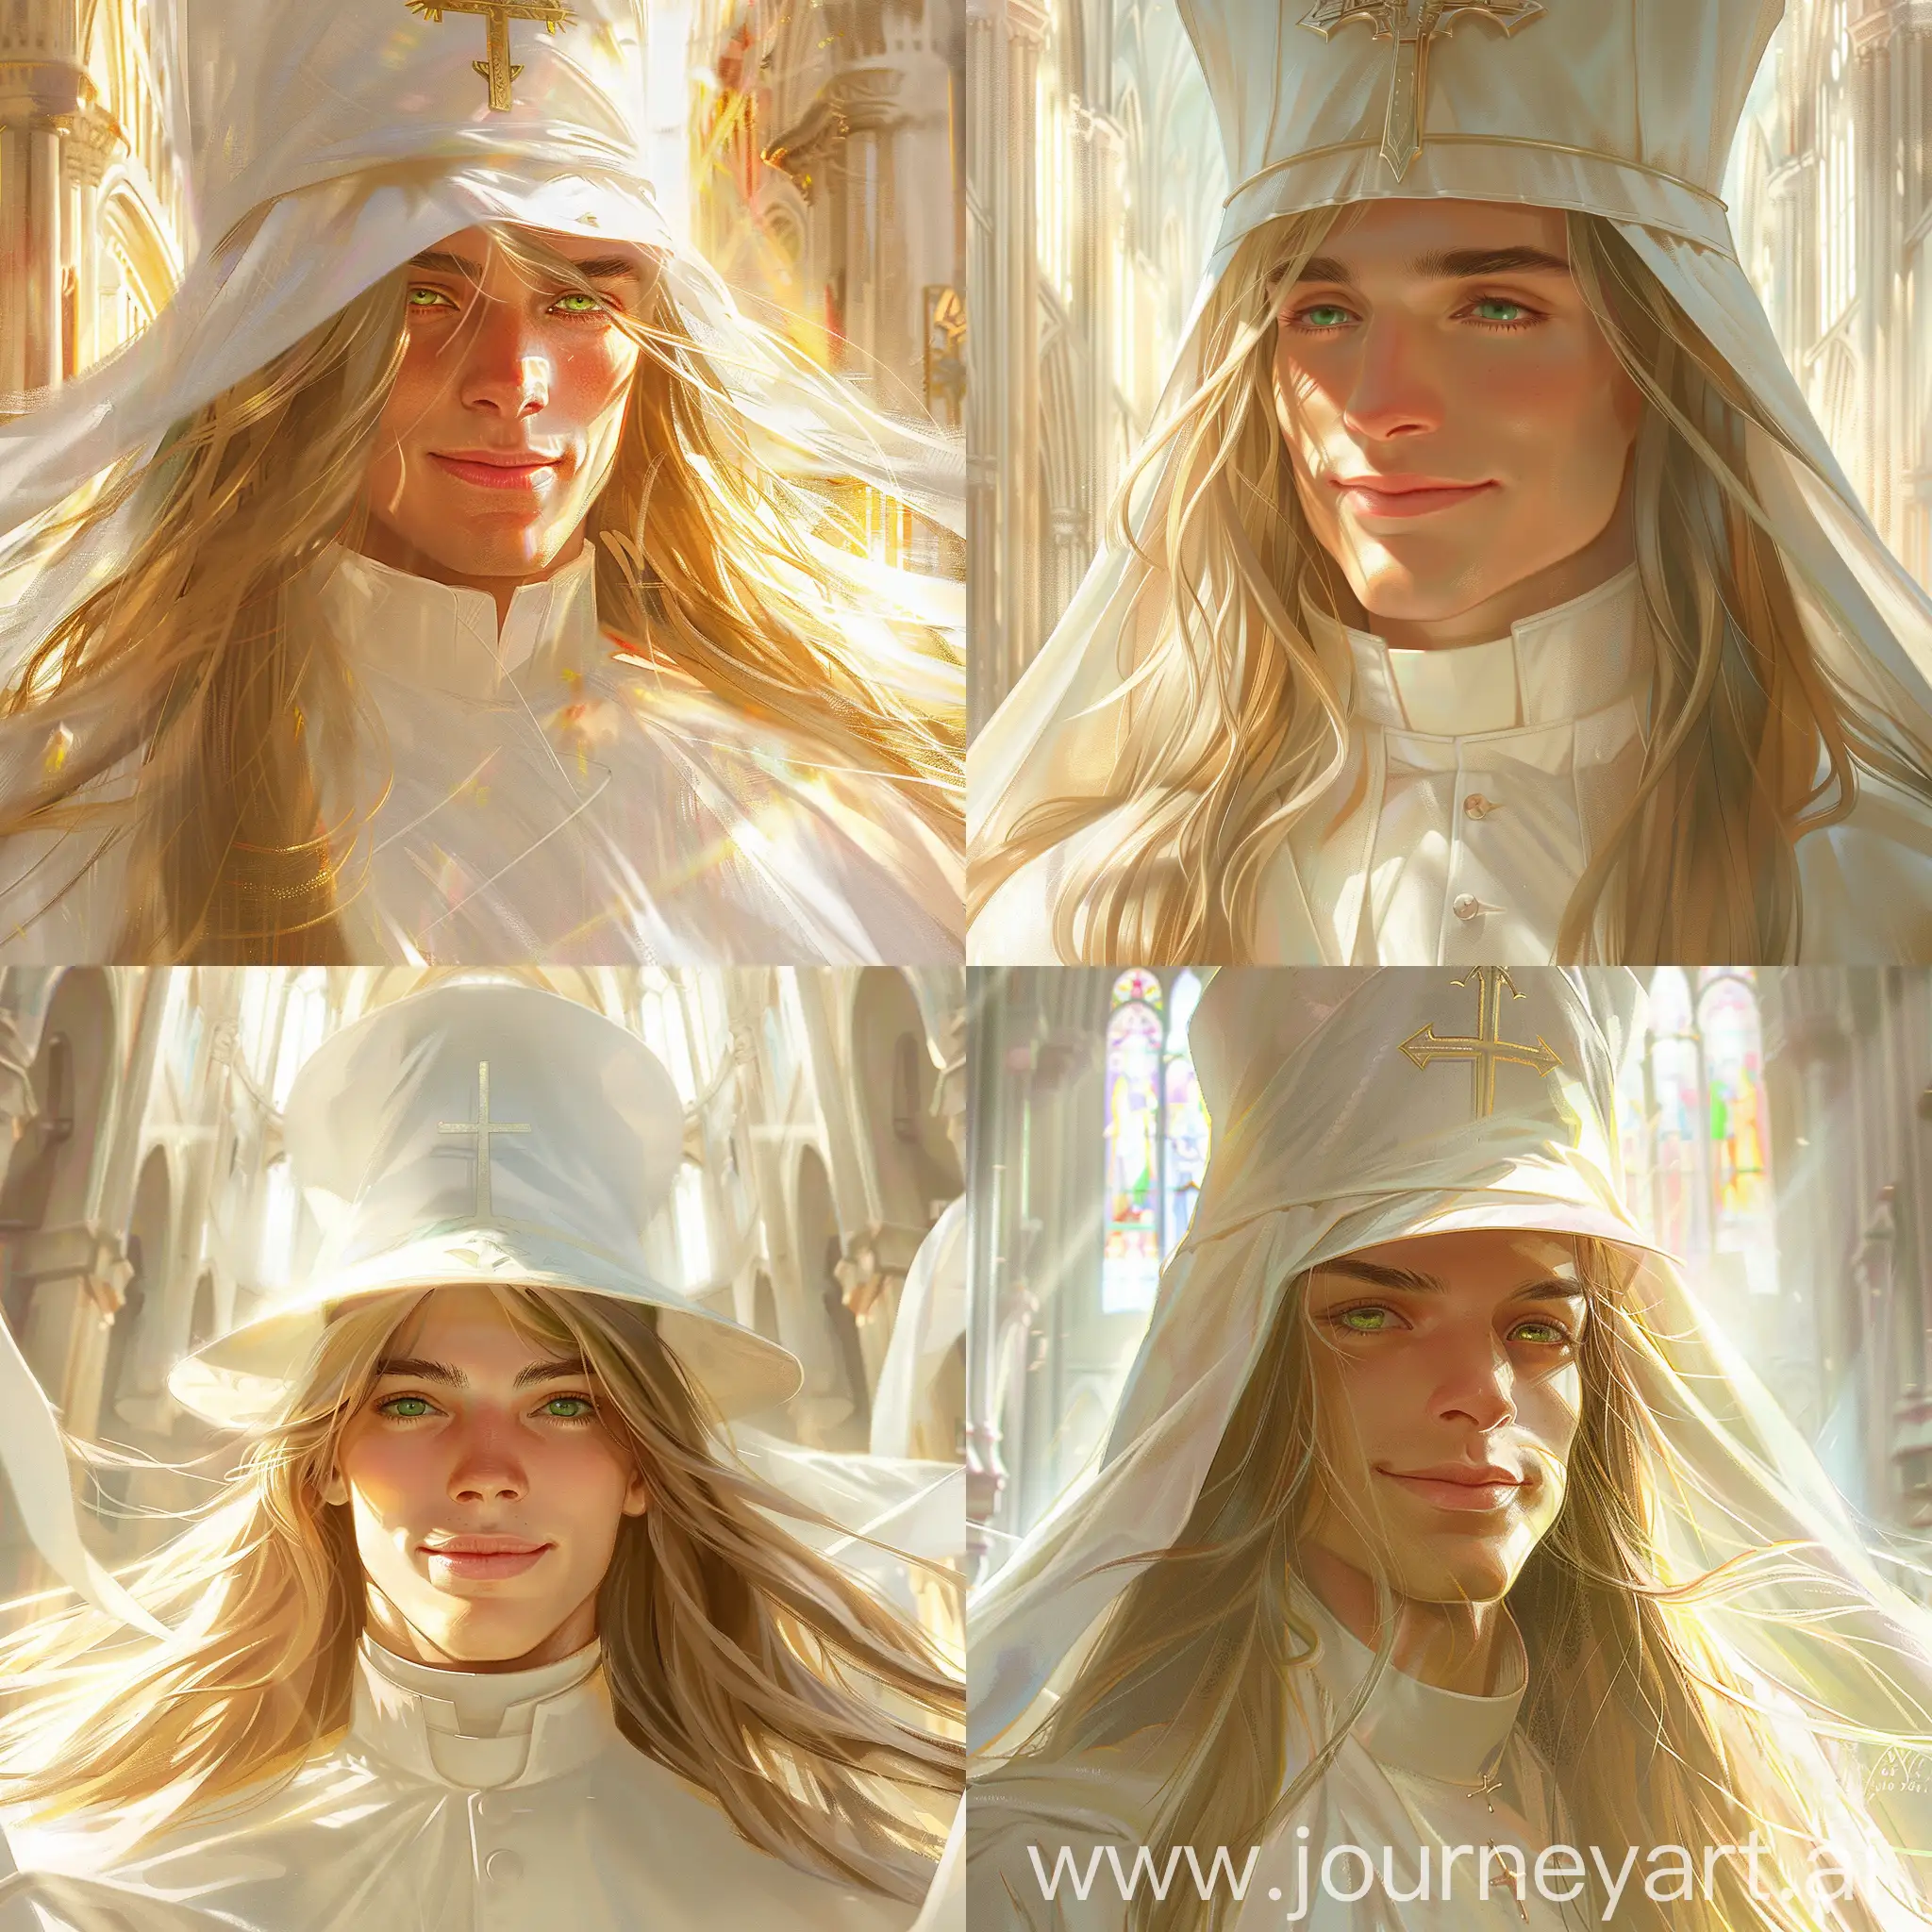 Craft a masterpiece portraying a young male priest bathed in the ethereal light of a cathedral. His long, flowing blonde hair catches the sunlight, as vibrant green eyes emanate kindness from beneath a priestly hat. Enveloped in pristine white robes, his tranquil expression, marked by a closed-lips smile, exudes warmth and serenity